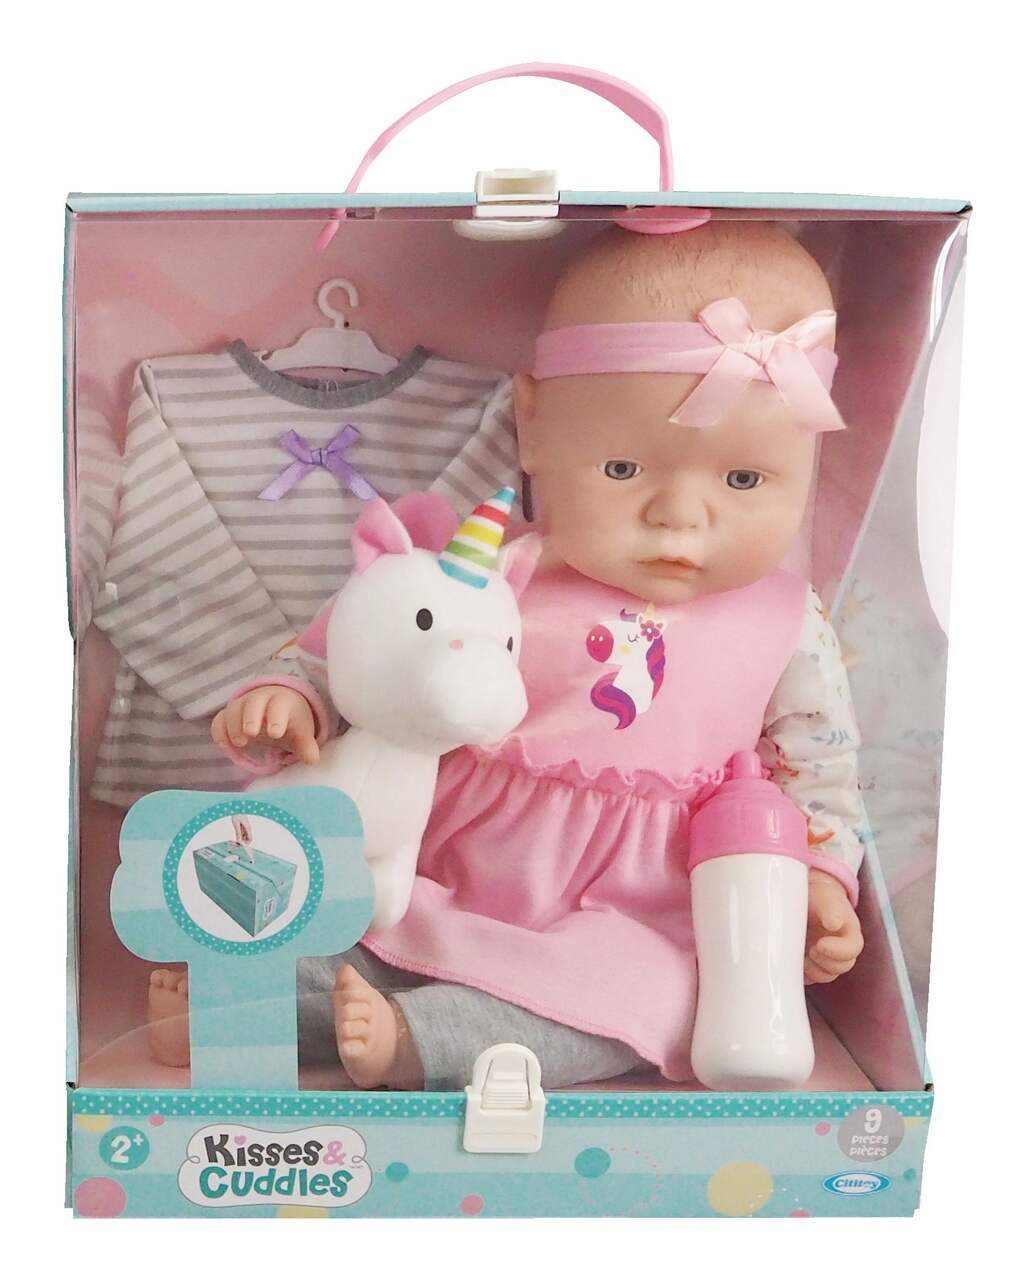 Kisses & Cuddles Baby Doll Toy w/Bathtub & Accessories, 12-in, Ages 2+